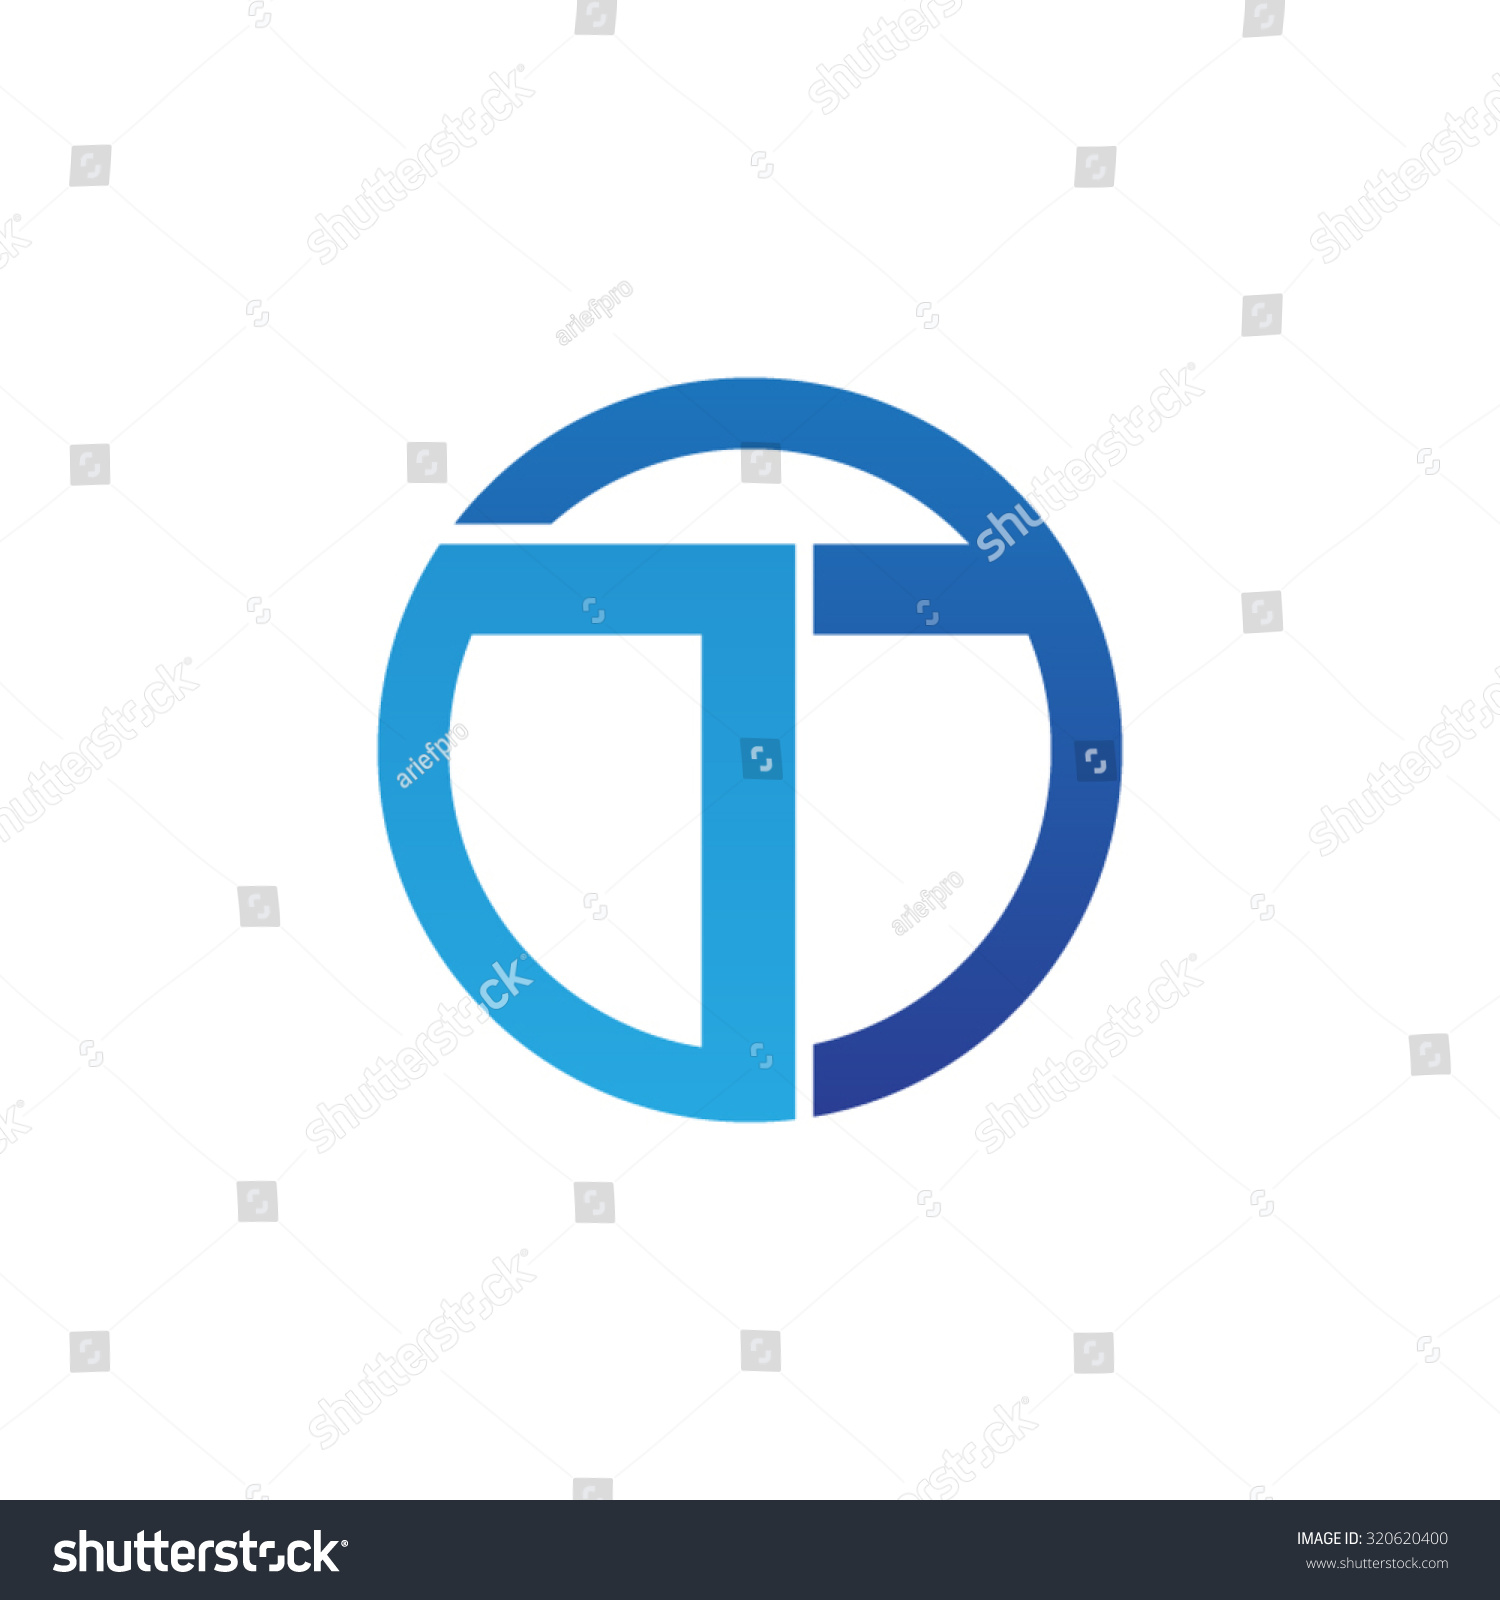 T Initial Circle Company Or To Ot Logo Blue Stock Vector Illustration